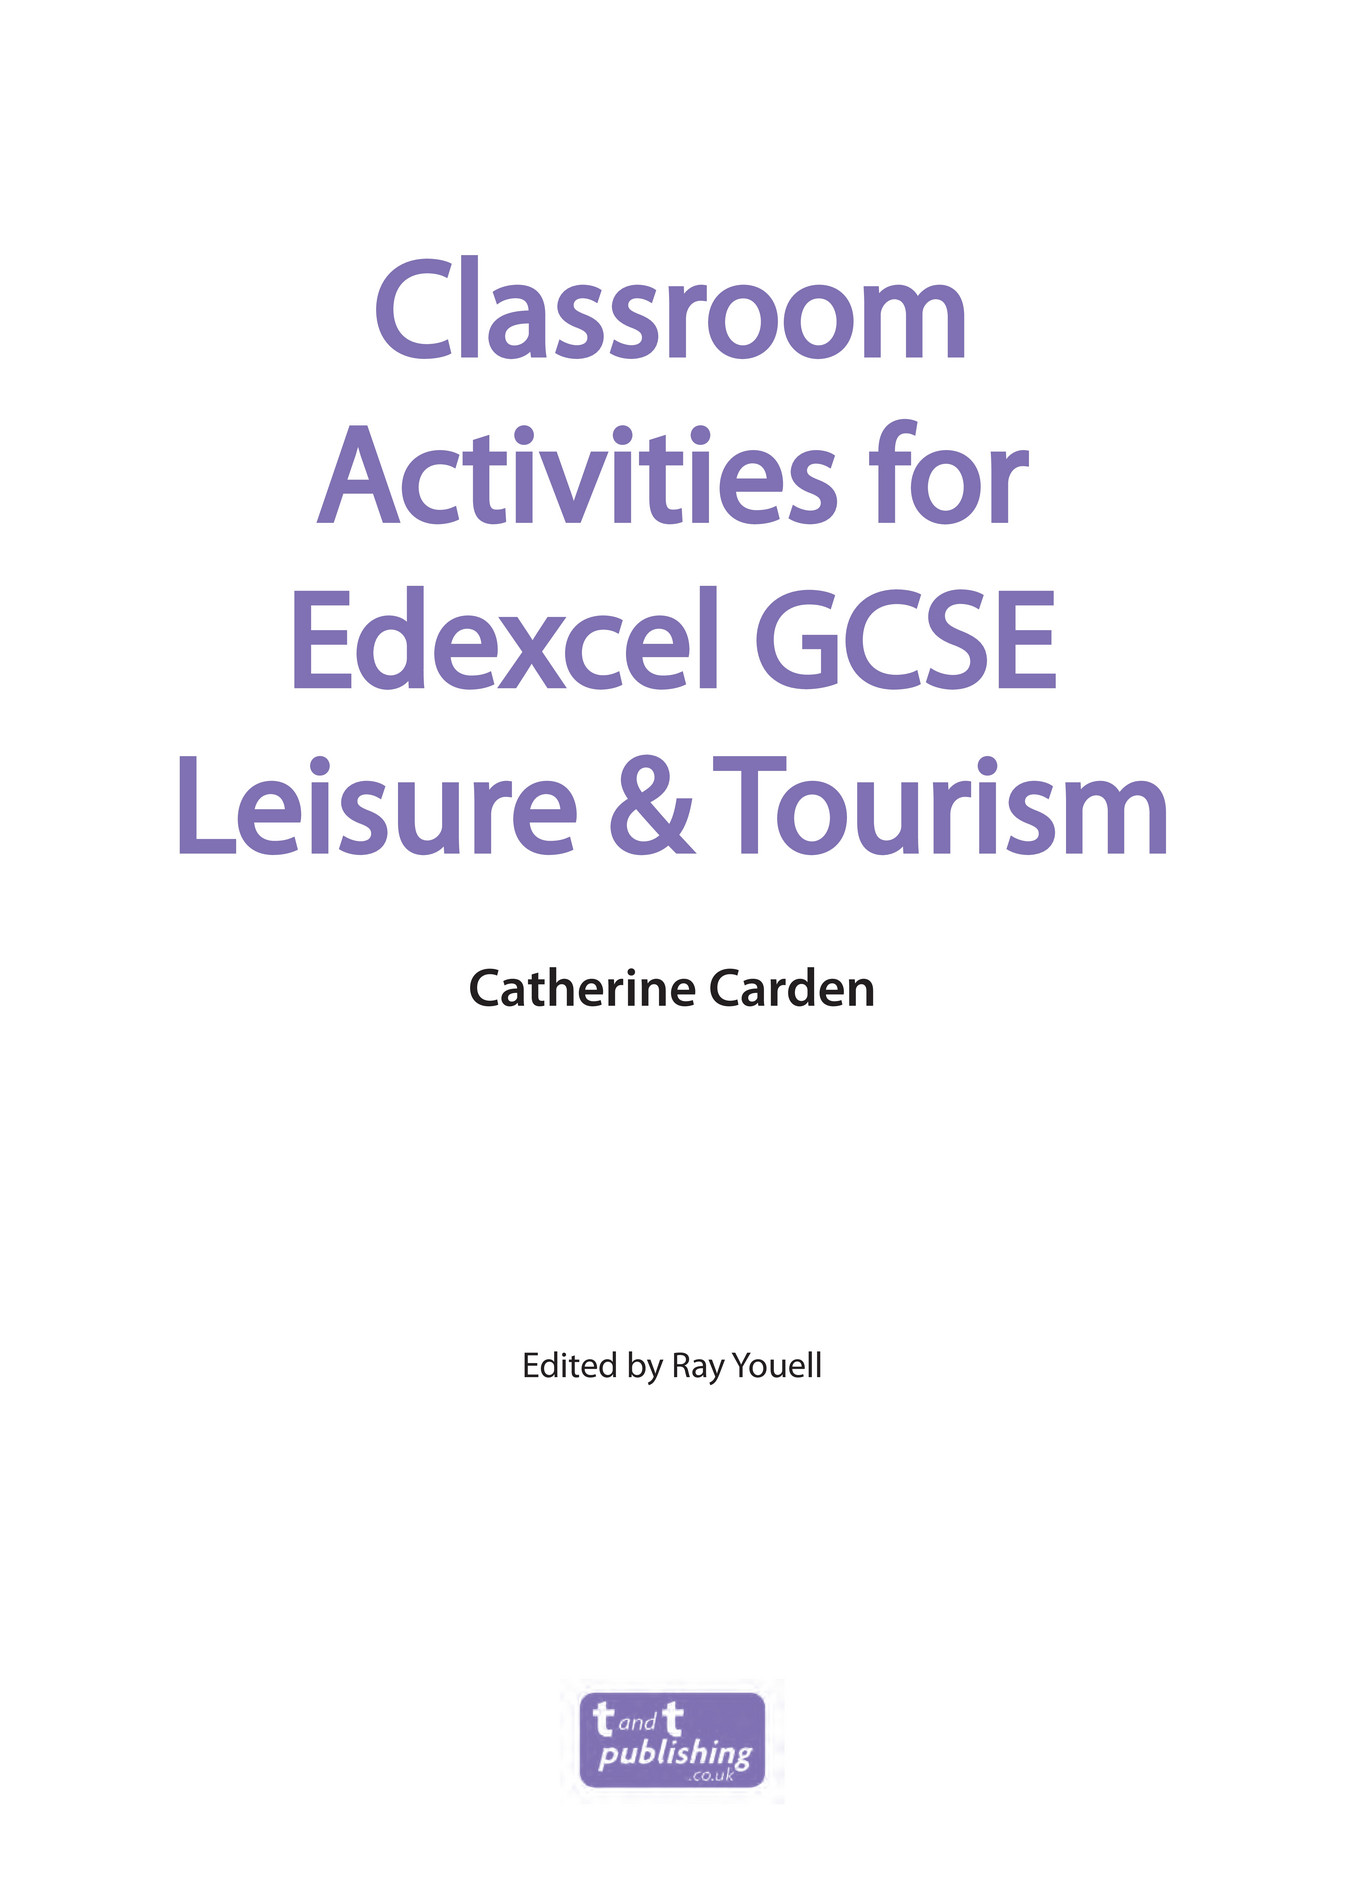 leisure and tourism gcse past papers